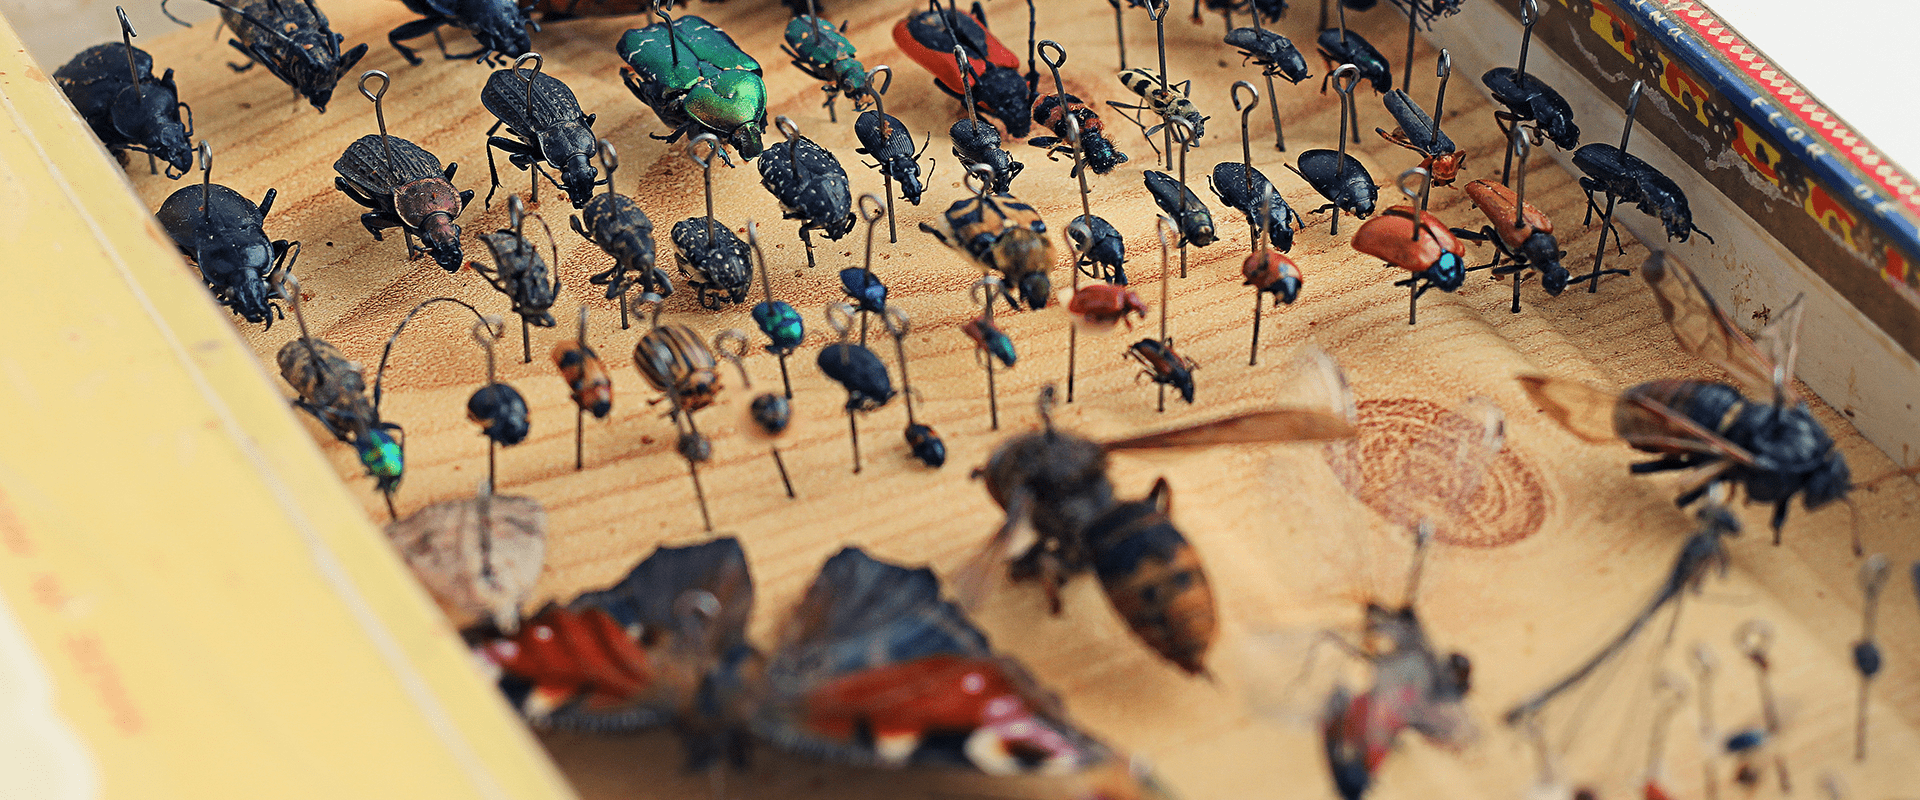 entomology collection of insect iq with insects in display case on pins